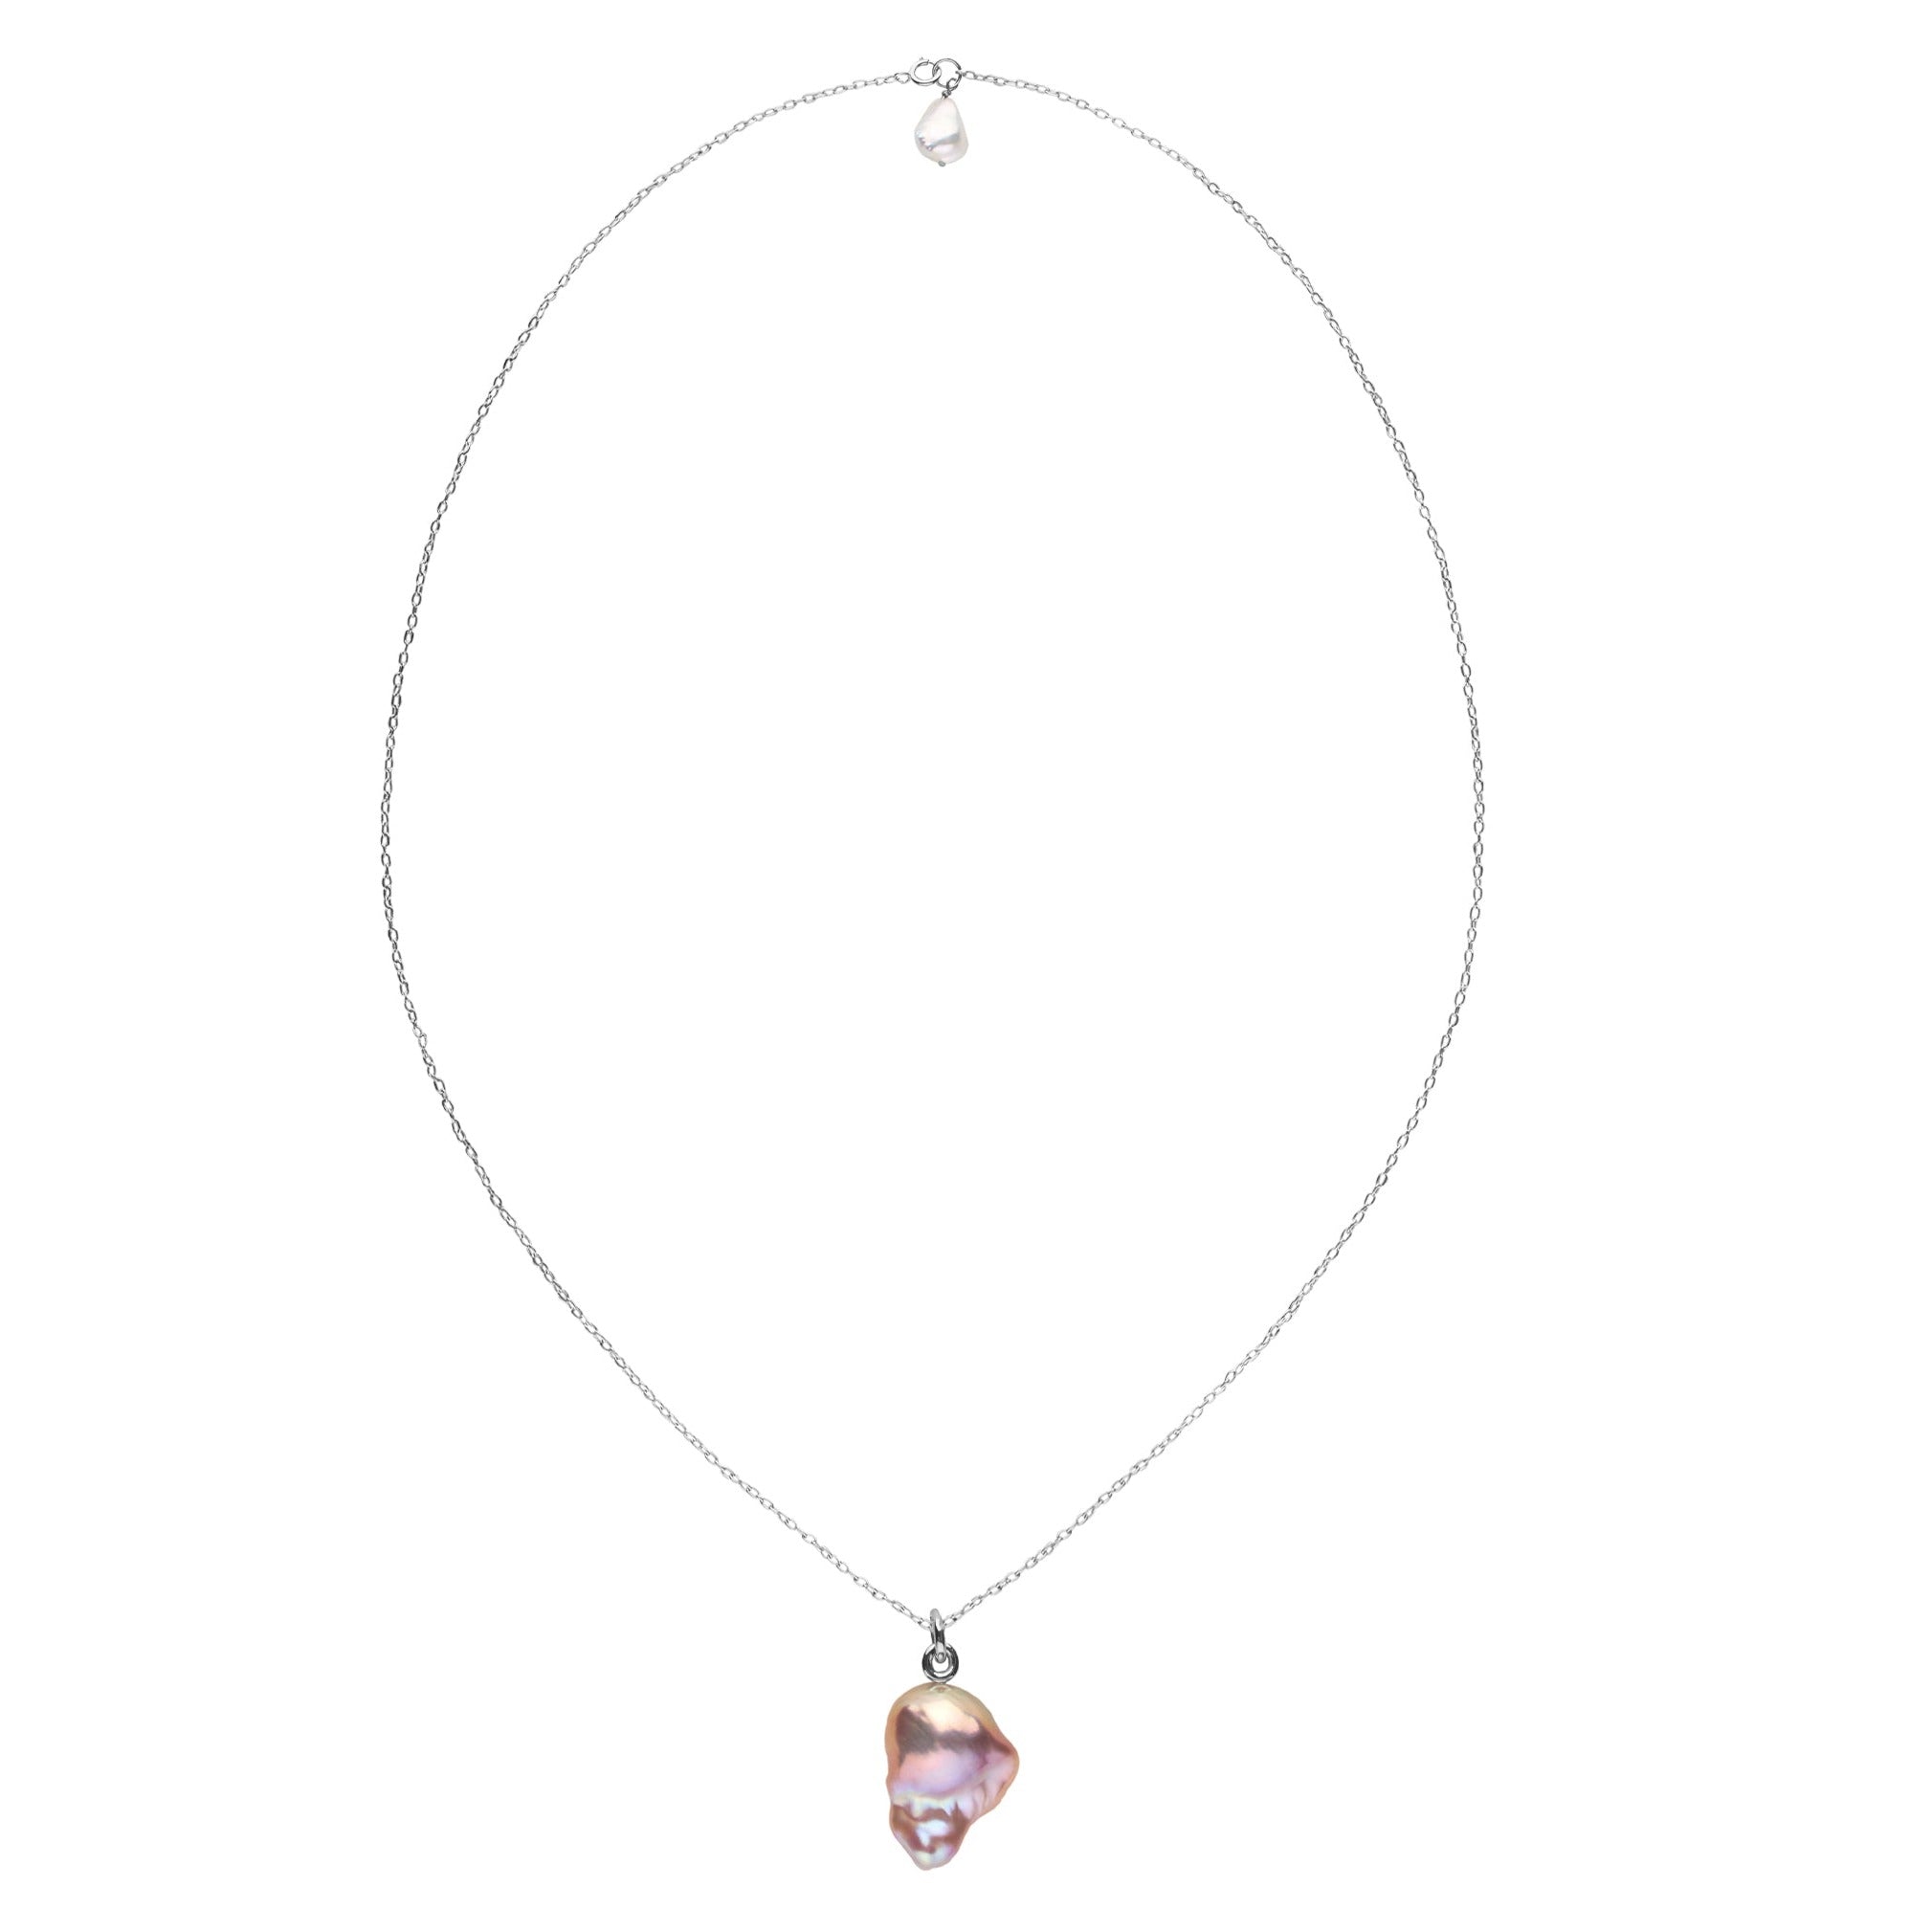 Lavender Freshwater Baroque Pearl Pendant with Keshi Pearl Accent